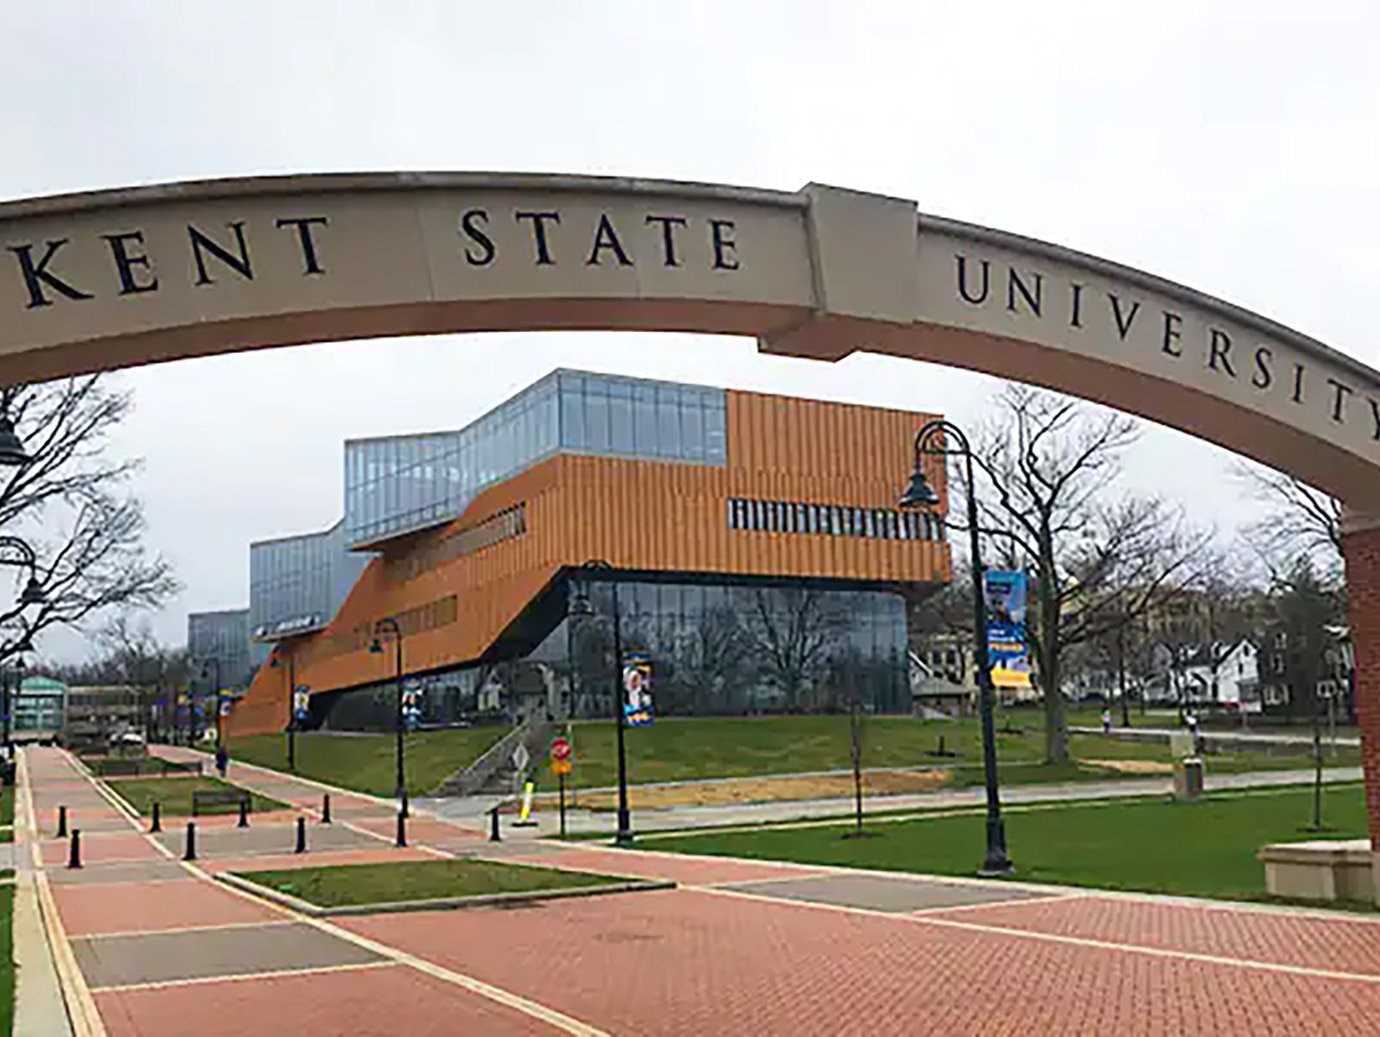 Arched sign of Kent State University